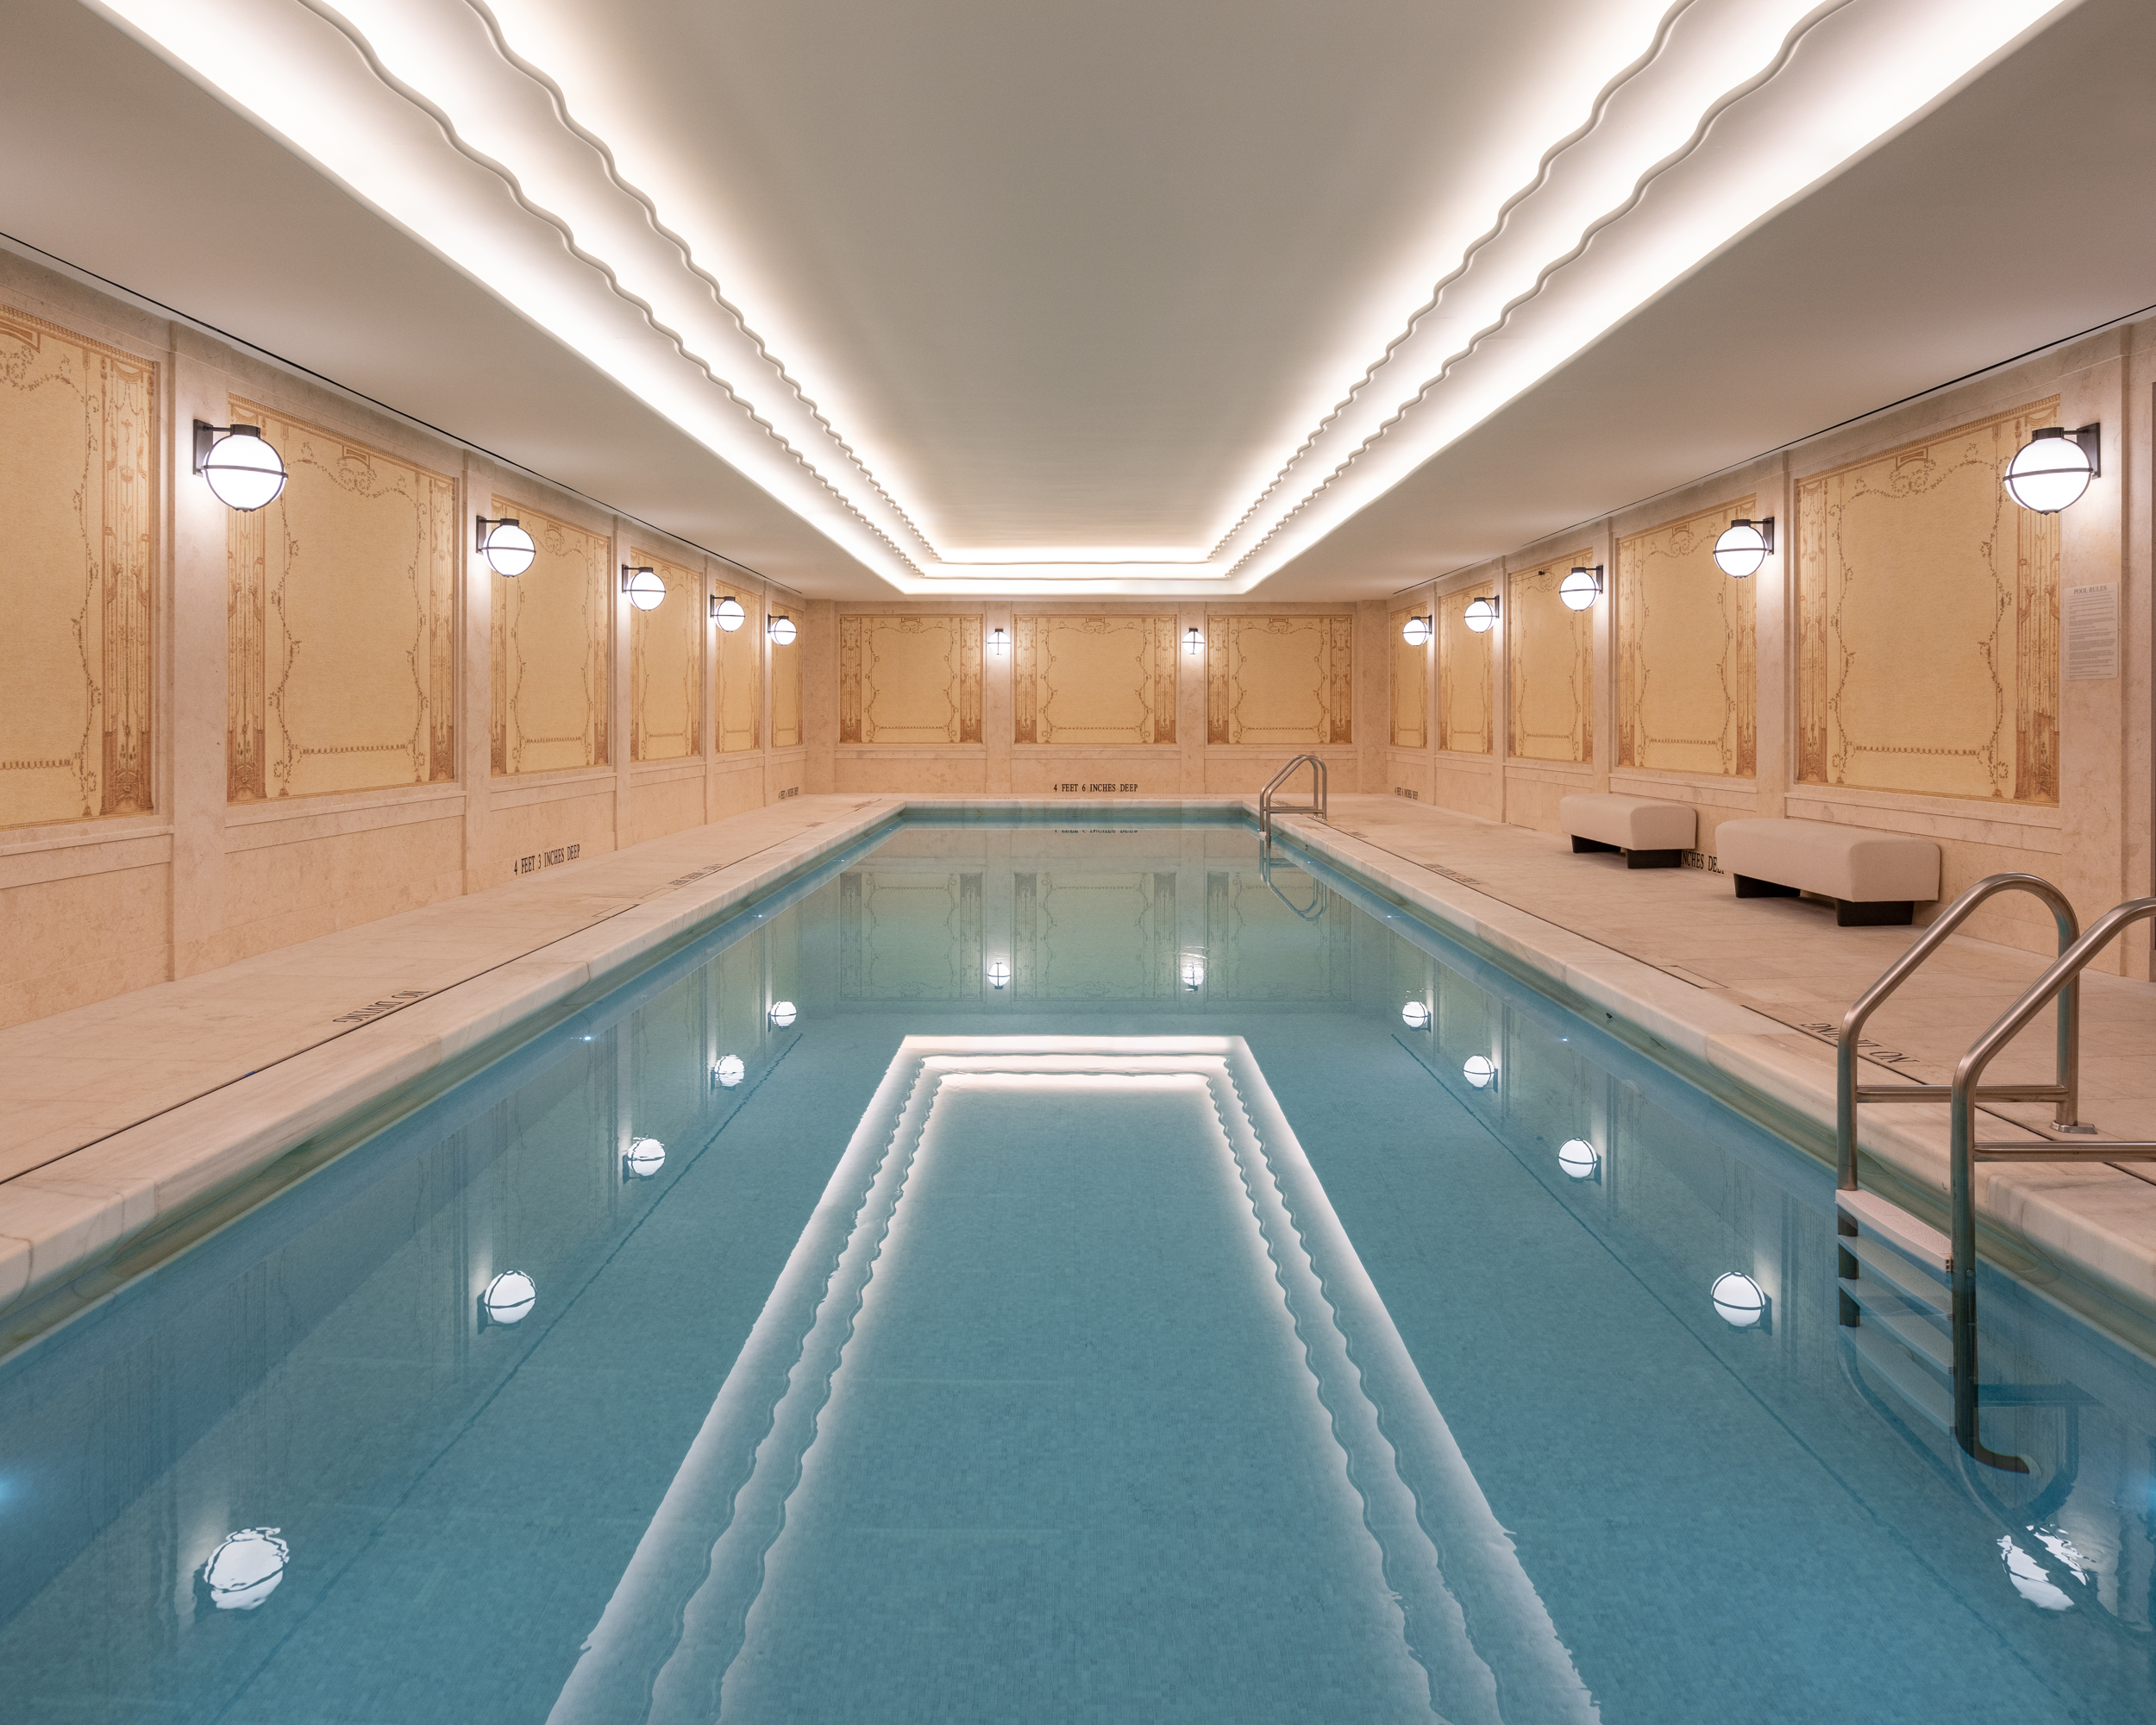 Underground 50-ft lap pool at the Woolworth Tower in New York. White ceiling with lights running the length of the pool.